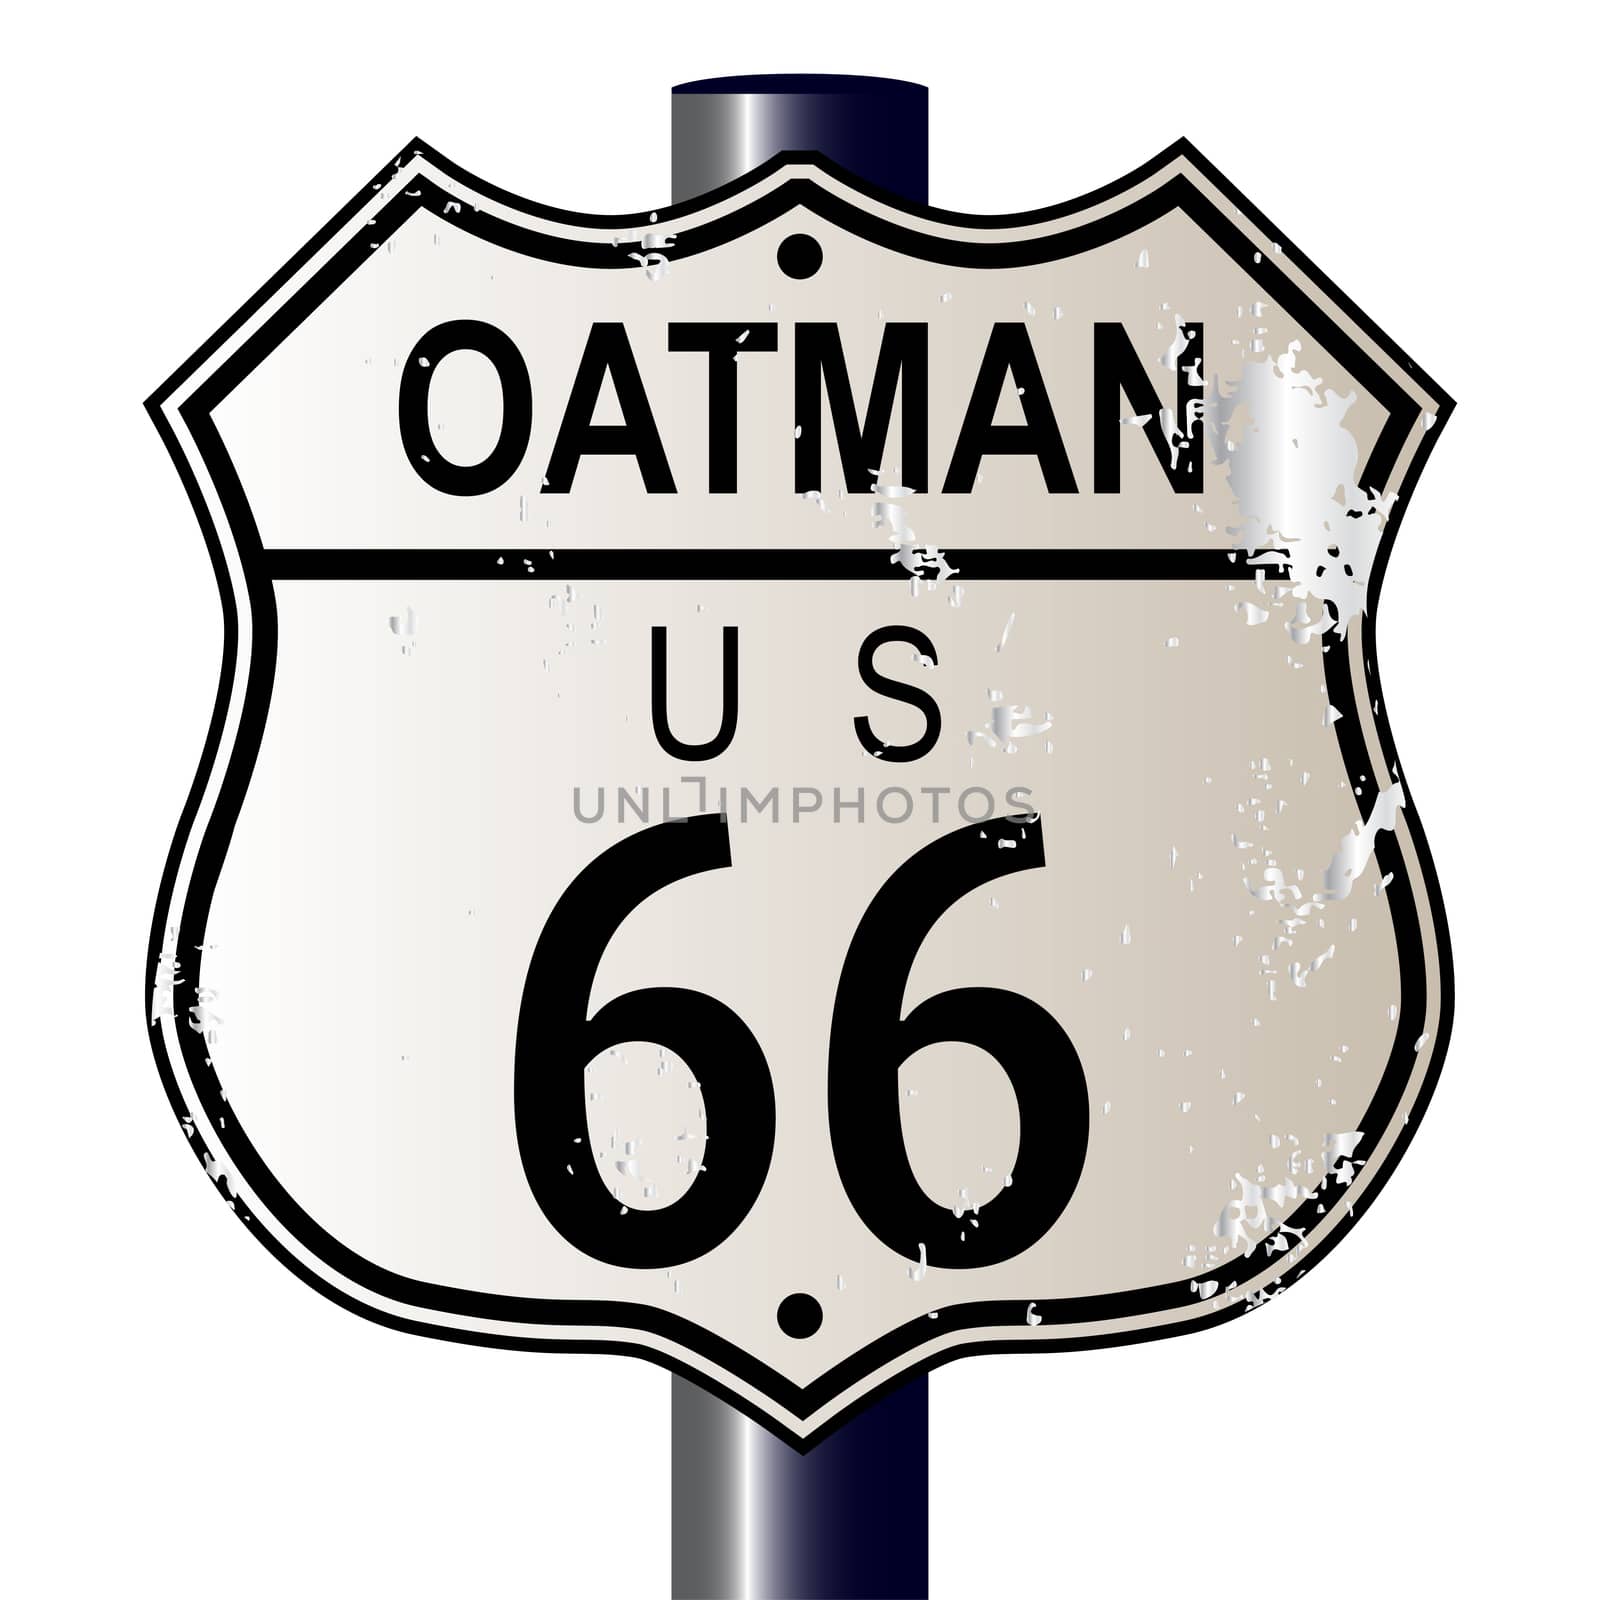 Oatman Route 66 traffic sign over a white background and the legend ROUTE US 66